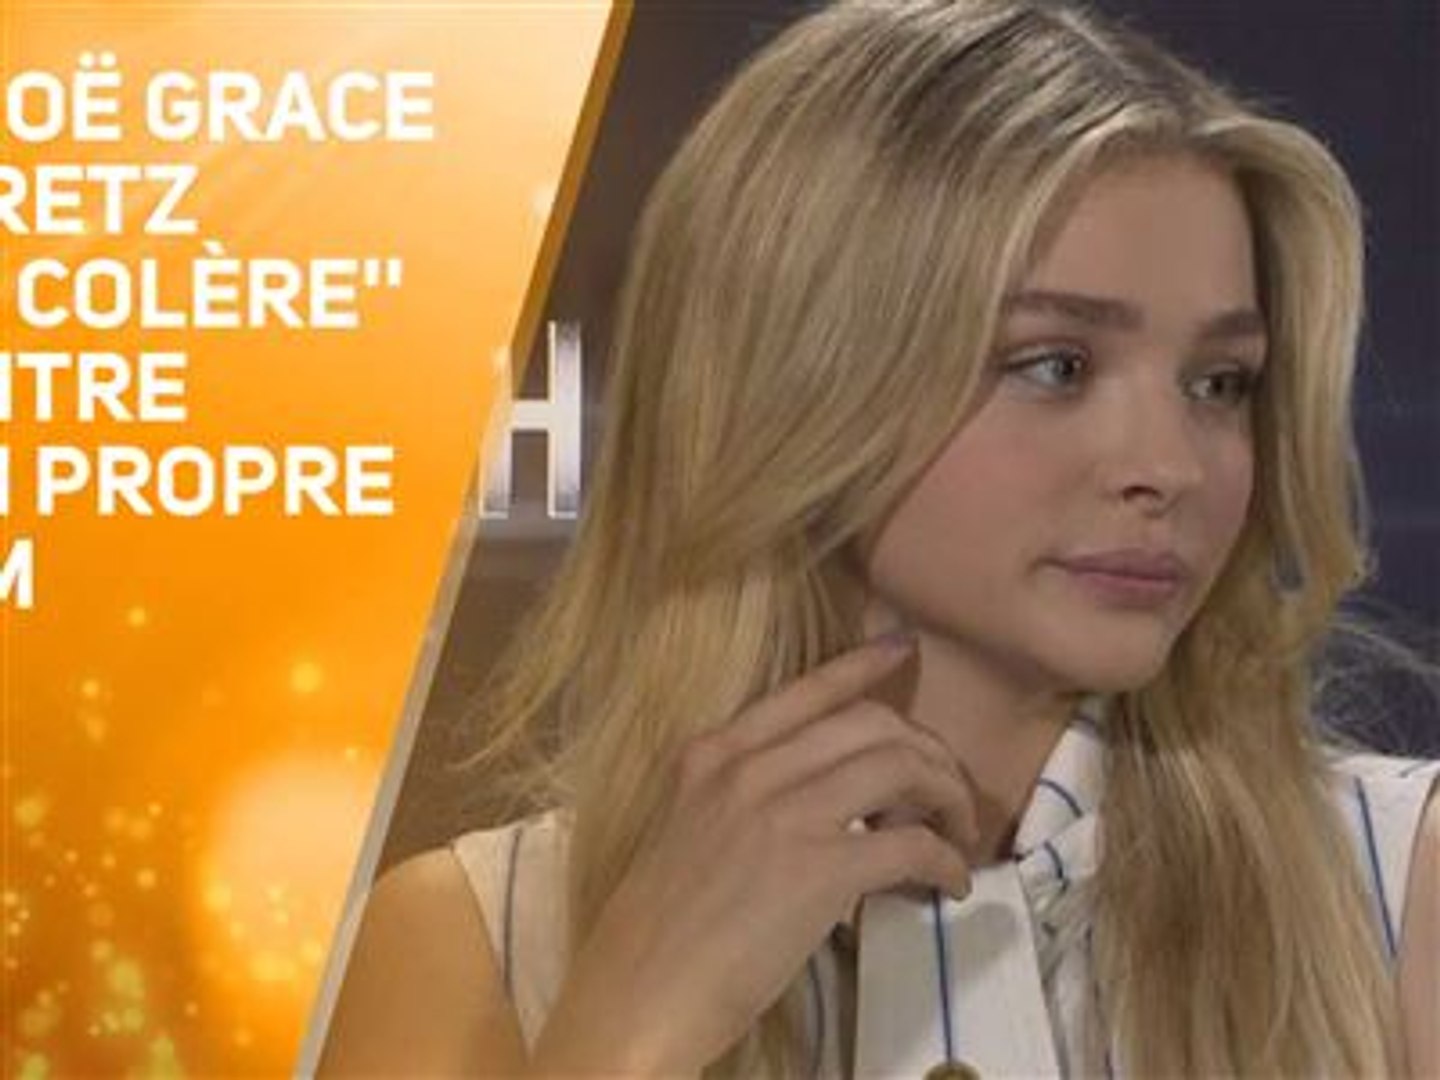 Chloe Grace Moretz became a 'recluse' after fat-shaming Family Guy